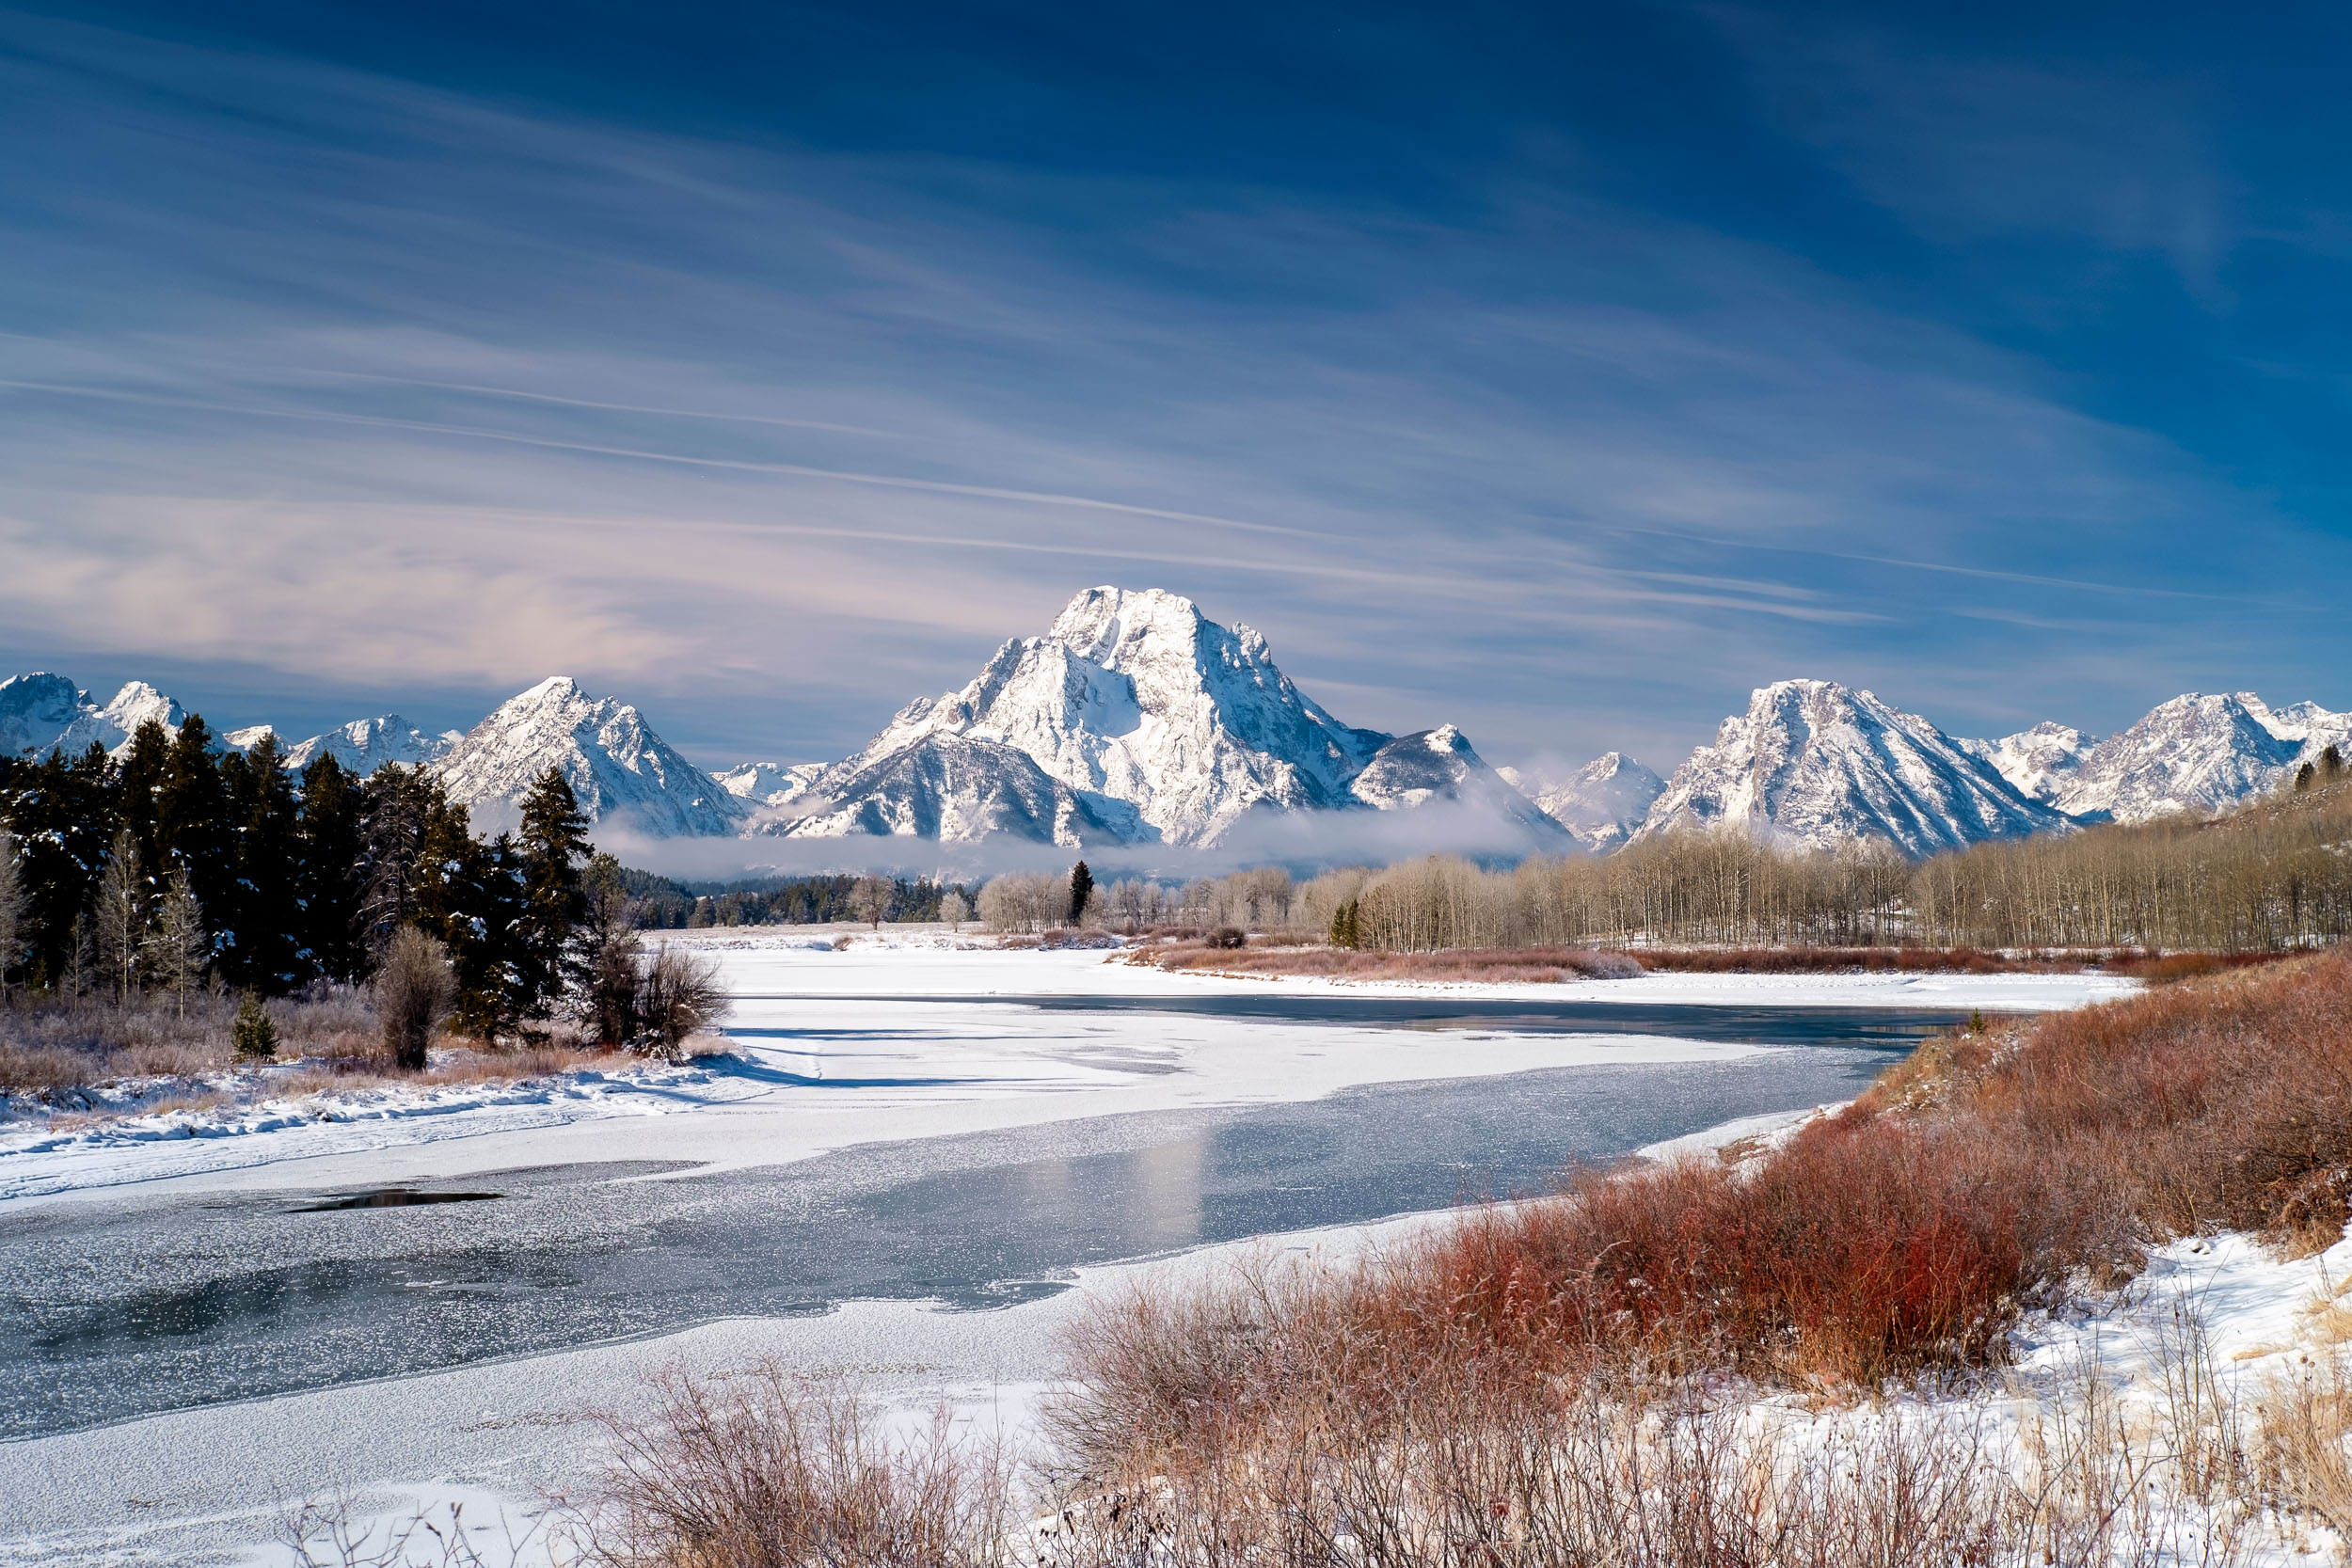  This image was from another last minute trip to Jackson, Wyoming. I’ve always wanted to see Grand Teton in the winter and with a perfect window of good driving conditions (at least on the way up) Reg and I decided to go for it. This image just bring